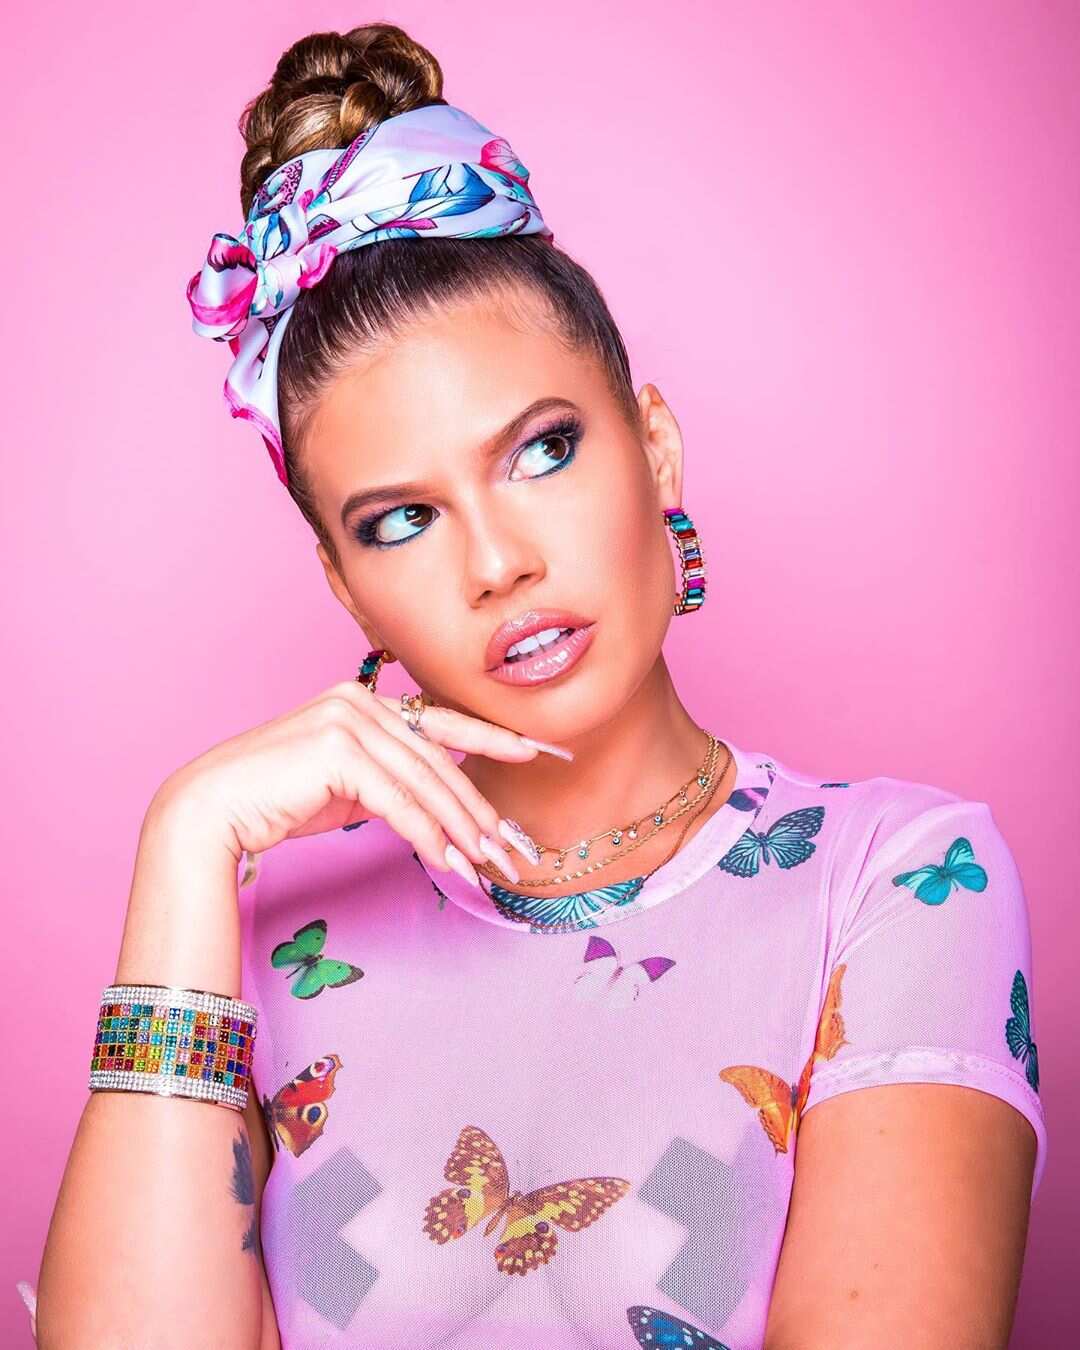 Is Chanel West Coast A Trans